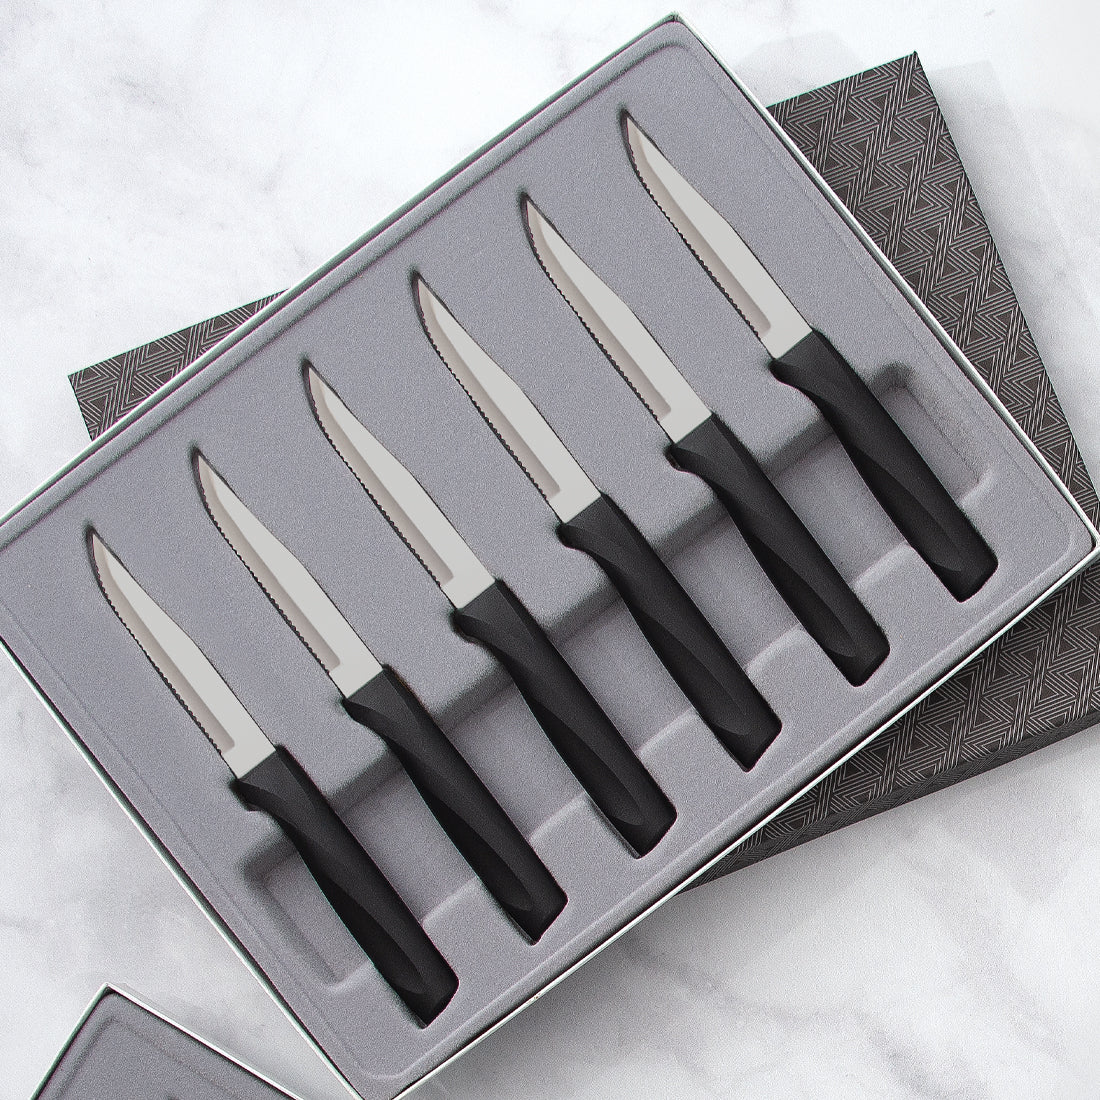 Sale: Meat Lovers Cutlery Gift Box Set by Rada Cutlery Made in USA